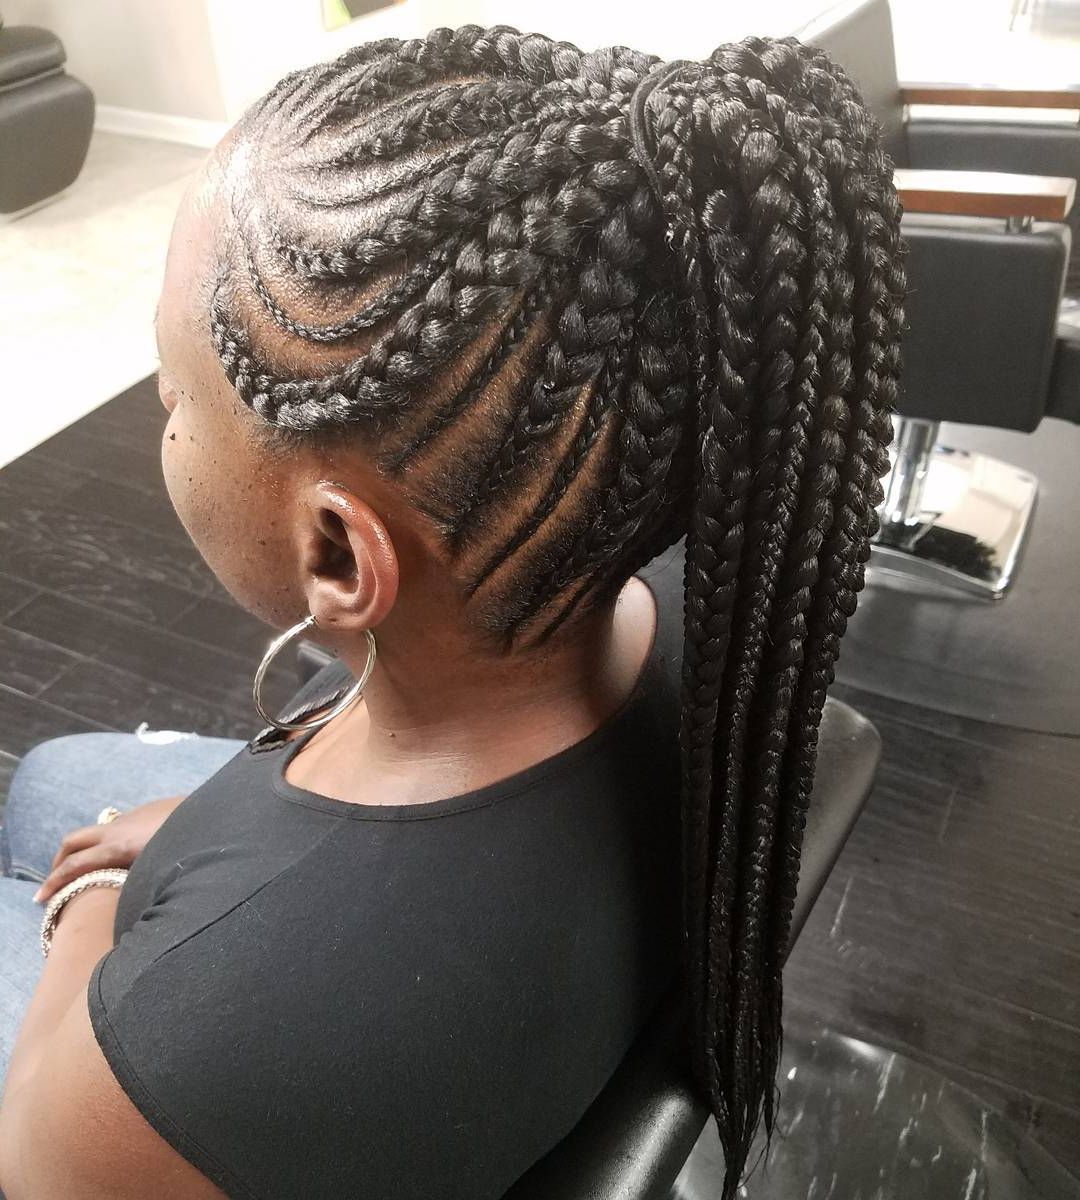 20 Gorgeous Ghana Braids For An Intricate Hairdo In 2019 Throughout Recent Stylish Braids Ponytail Hairstyles (View 7 of 20)